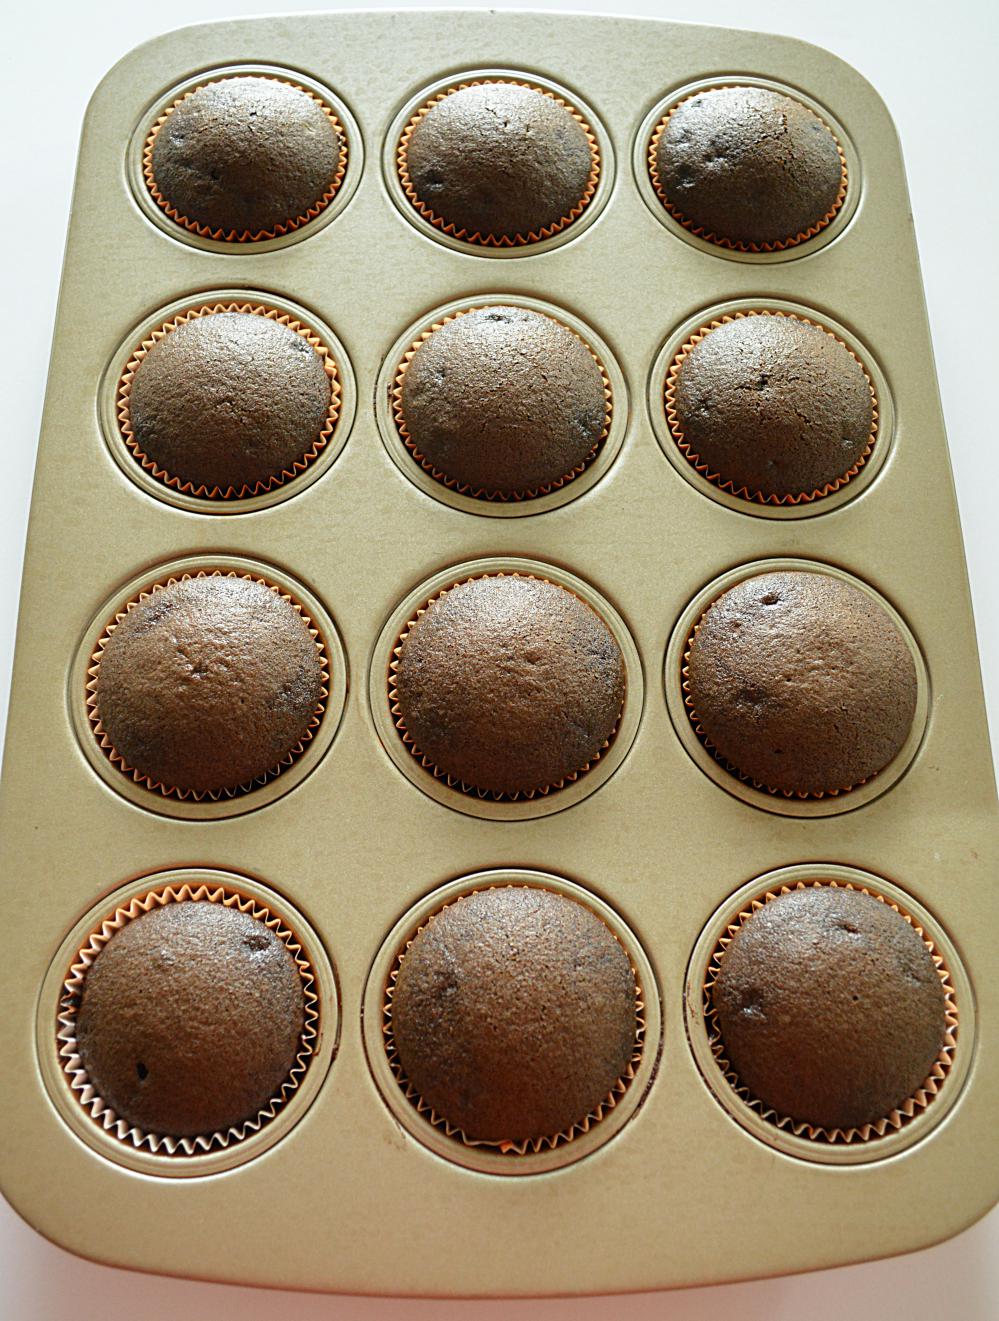 Perfectly baked eggless chocolate cupcakes